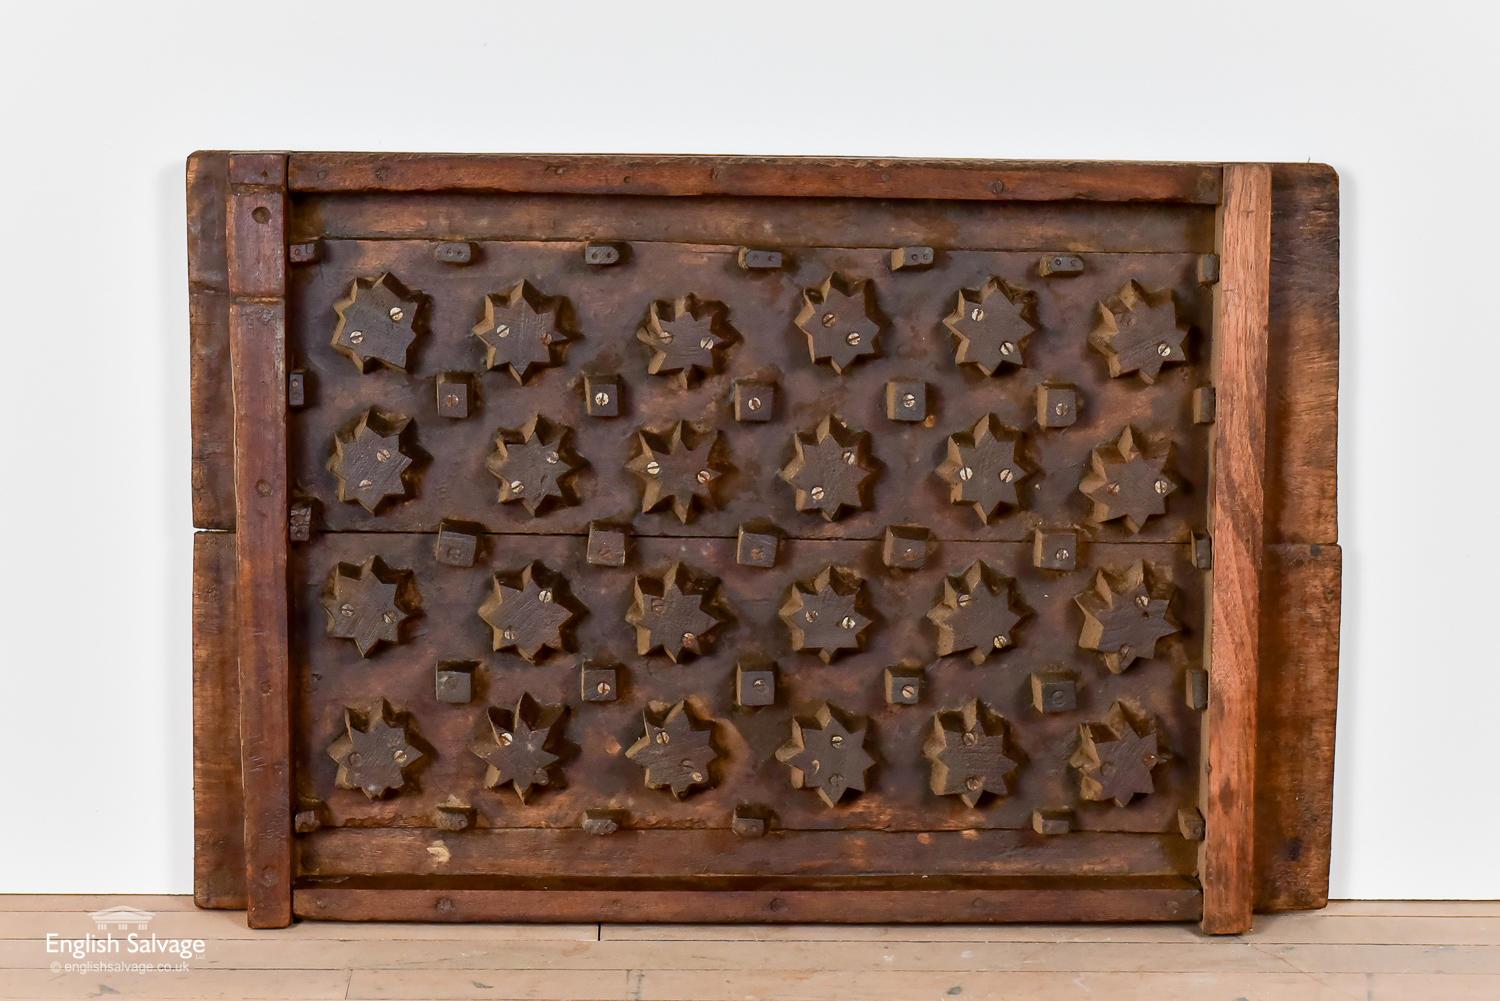 Reclaimed grill mould in teak. It is rustic and simple in design with hand carved stars and squares screwed on to the board base. This unusual item could be put back to work as mould or used as a decorative piece.